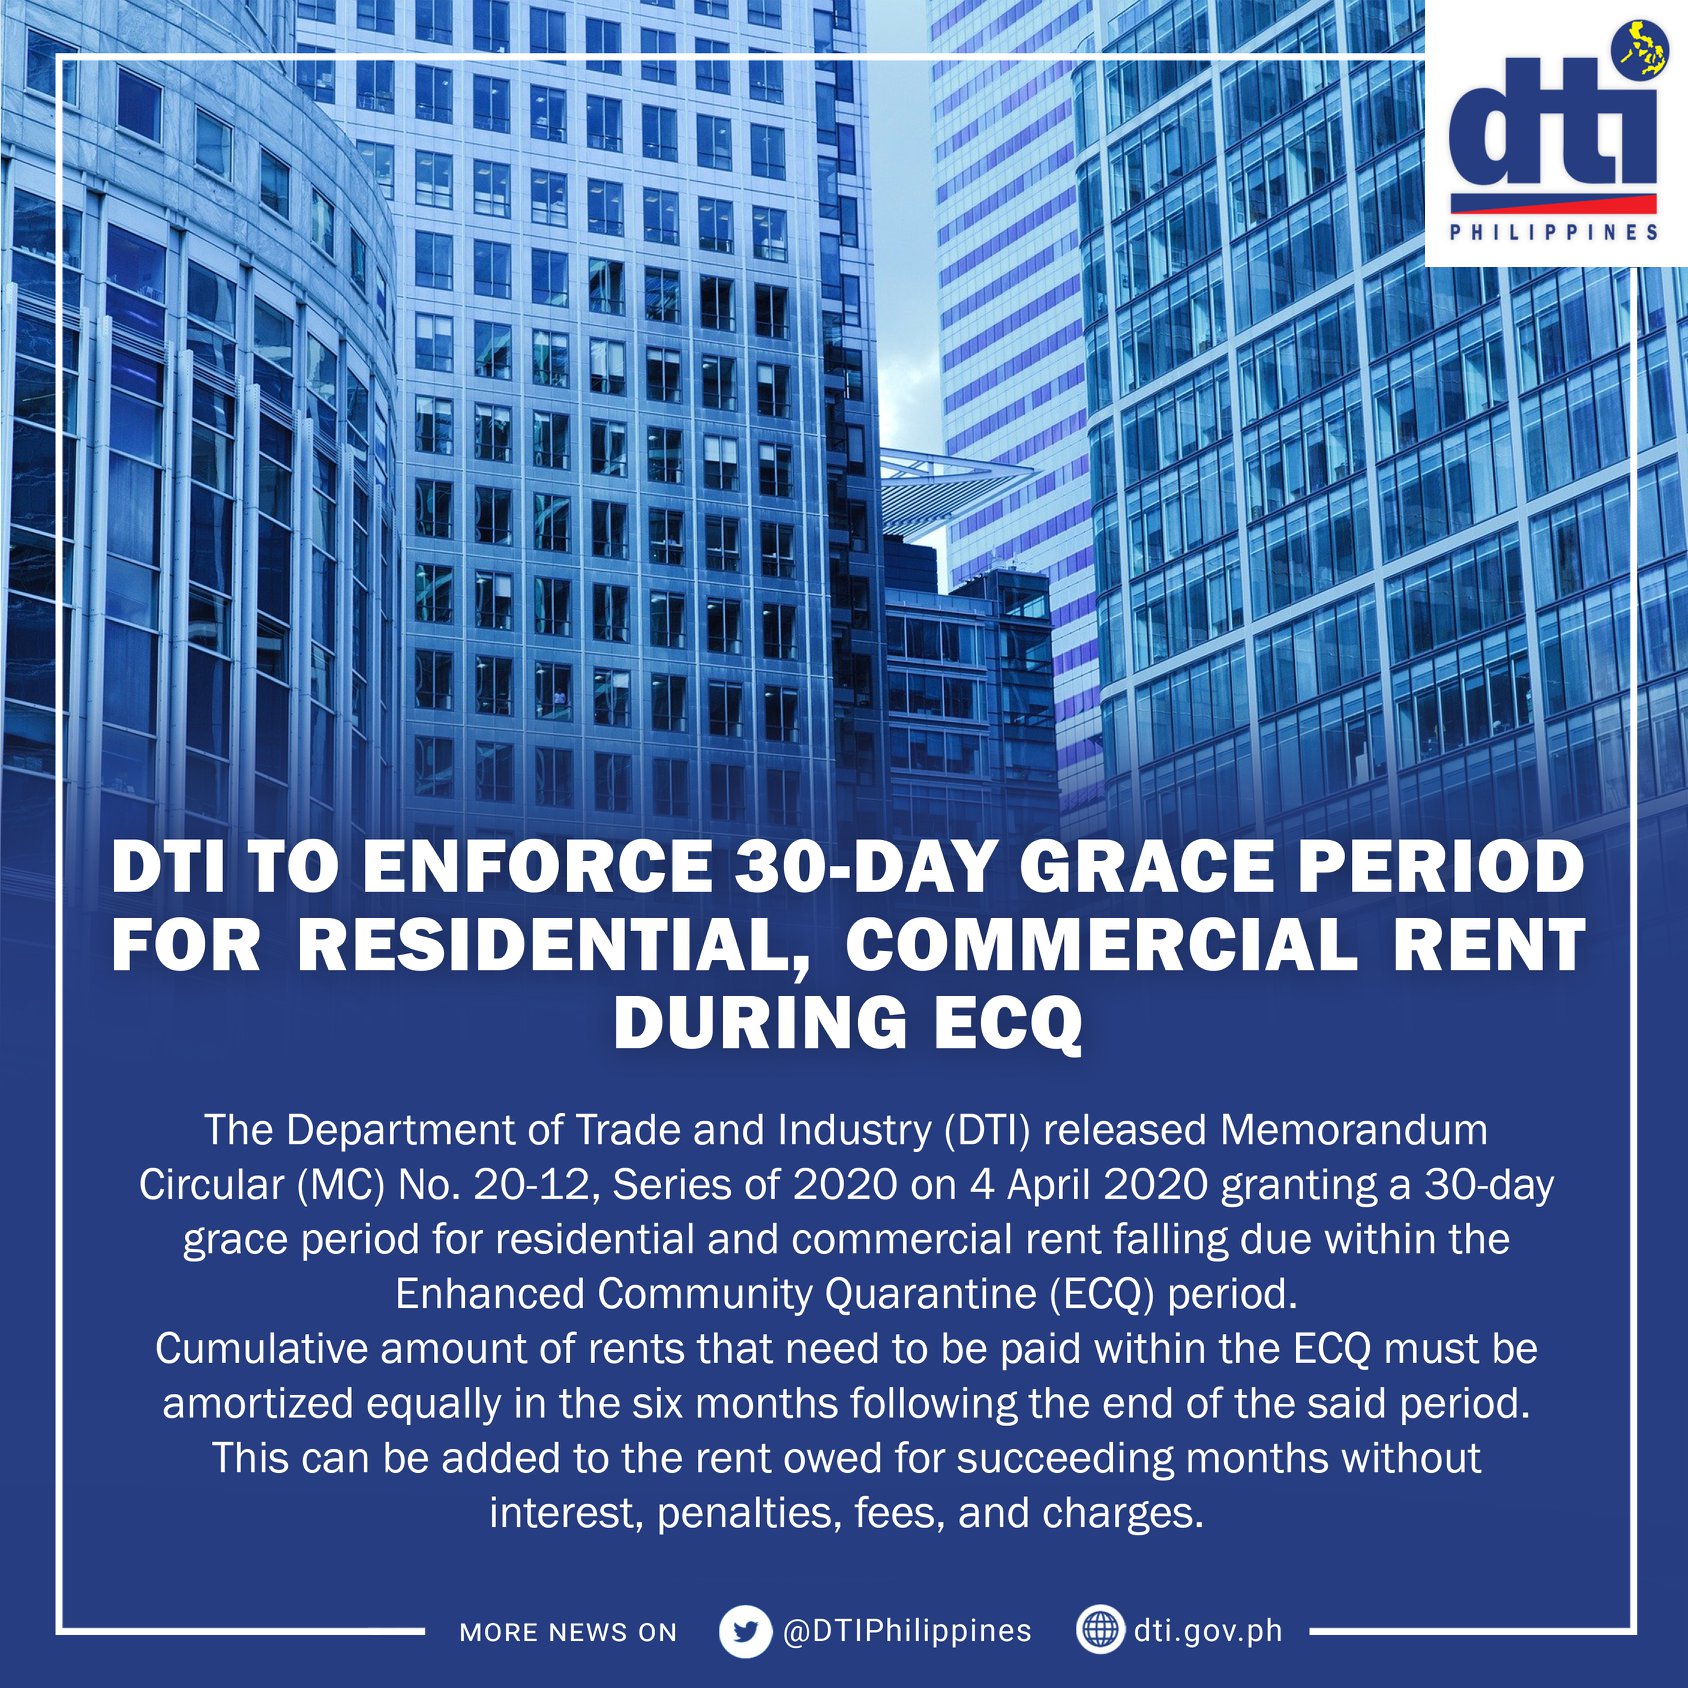 Blog_DTI to enforce 30-day grace period for residential, commercial rent during ECQ